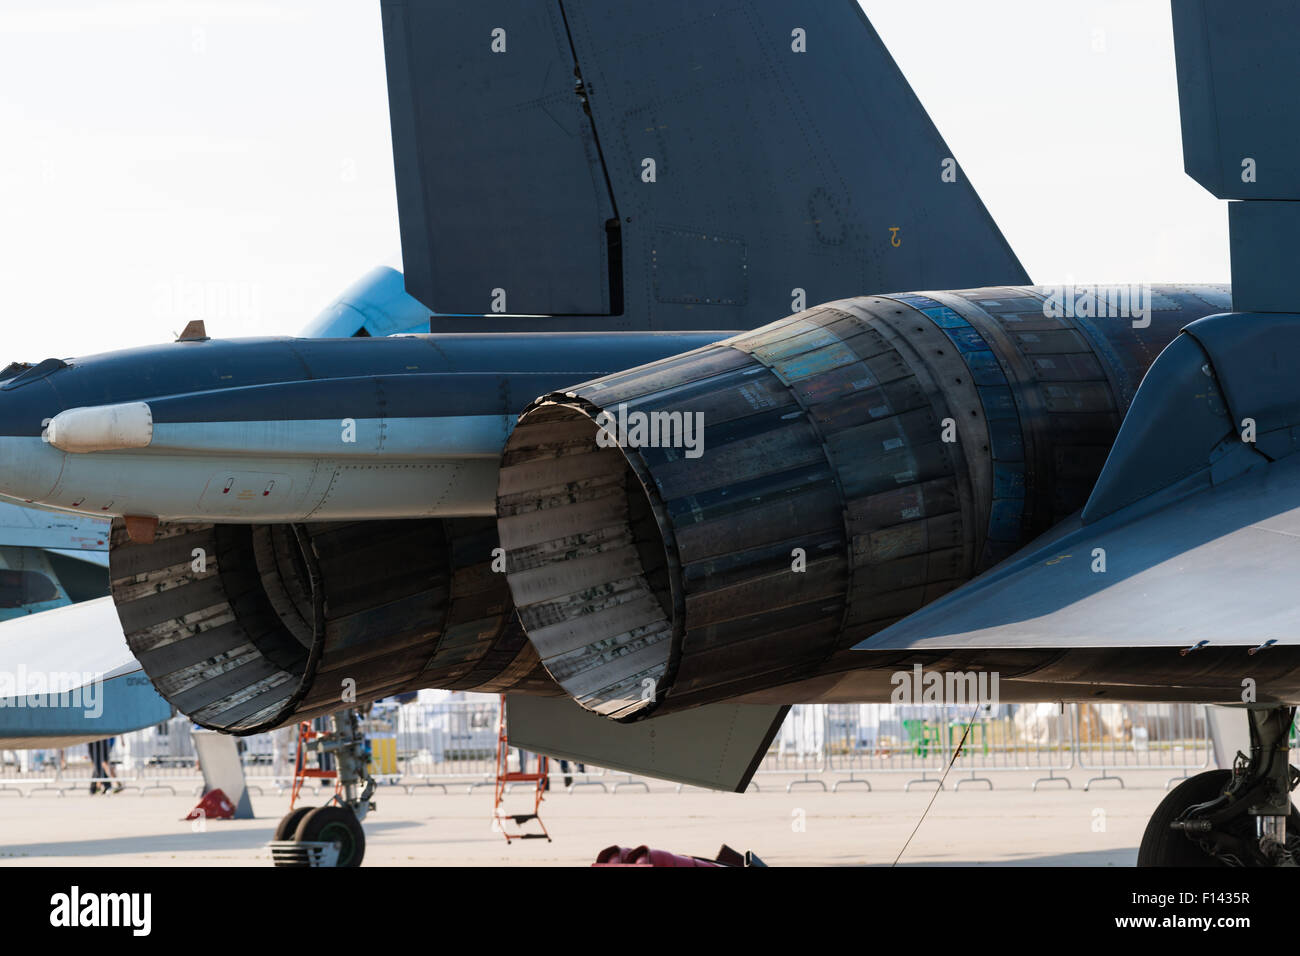 Moscow, Russia, Wednesday, August 26, 2015. The Twelfth International Moscow Aerospace Show MAKS 2015 was opened in Zhukovsky city in the Moscow Region on August 25, 2015. The aim of the show is to demonstrate Russian aerospace achievements, make contracts and negotiate international projects. Motor nozzles of Sukhoi Su-30 (Flanker-C) fighter plane. Credit:  Alex's Pictures/Alamy Live News Stock Photo